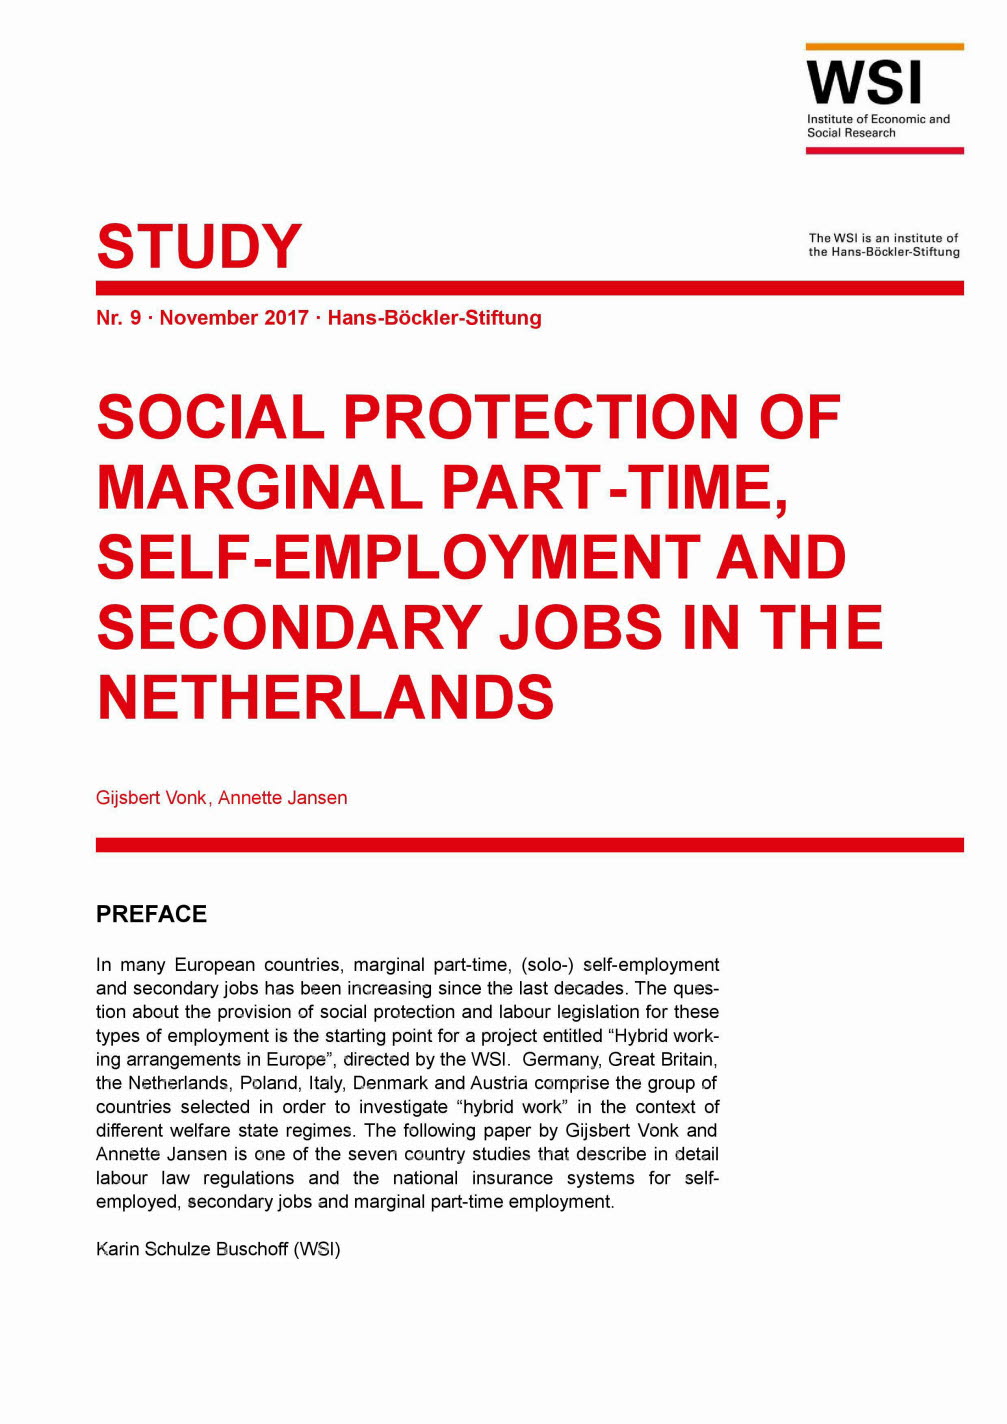 Social protection of marginal part-time, self-employment and secondary jobs in the Netherlands